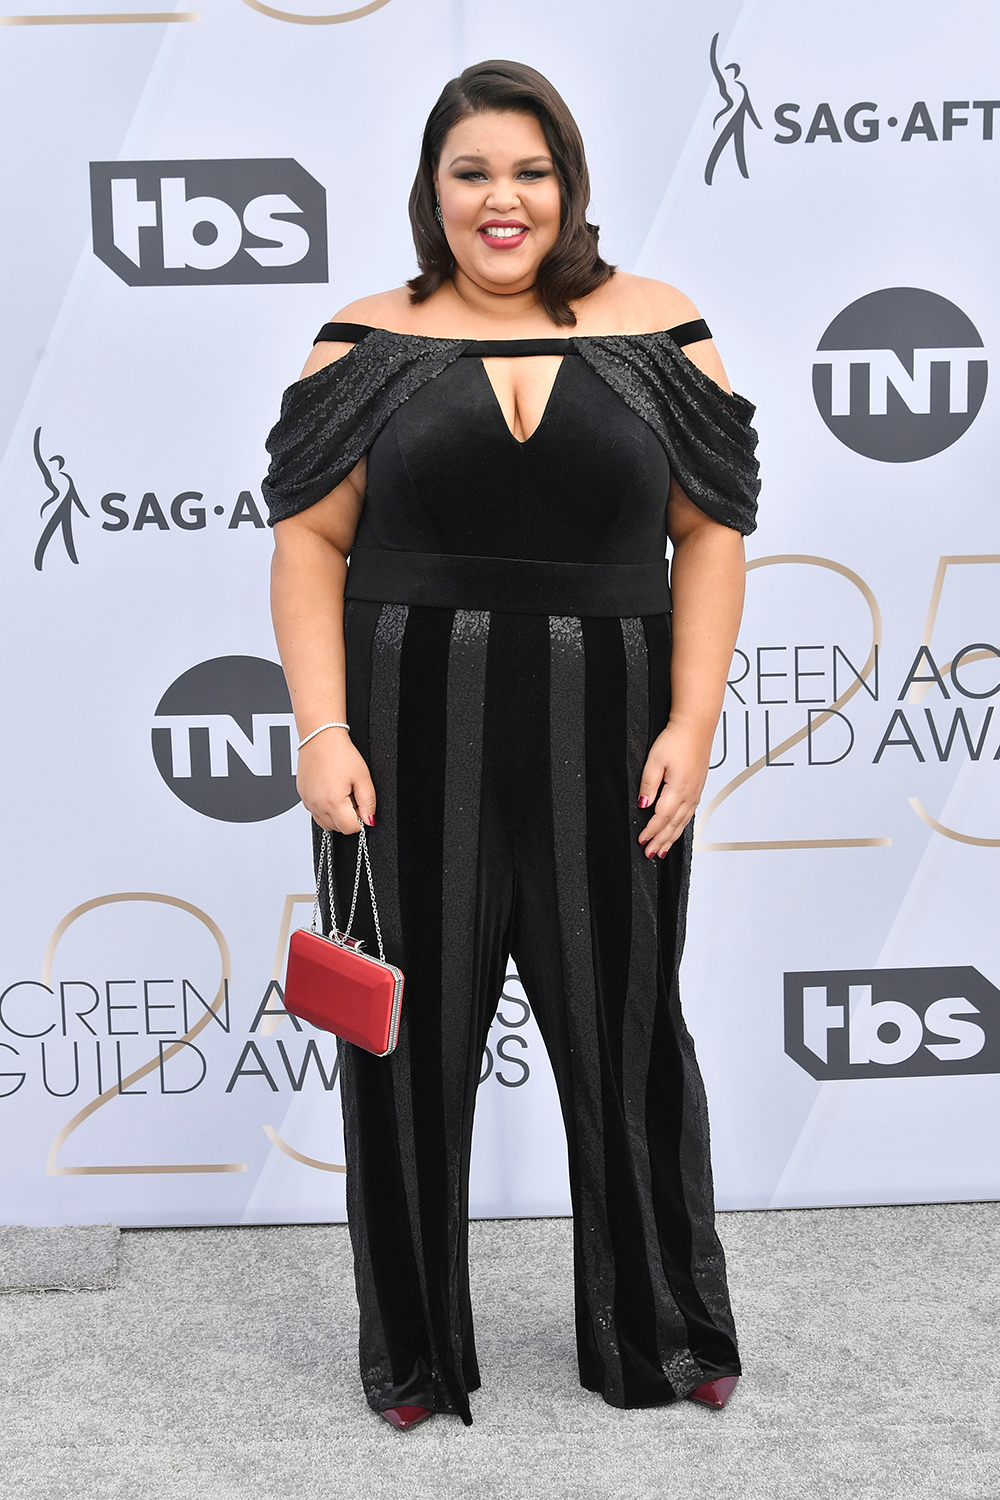 Mandatory Credit: Photo by Rob Latour/REX/Shutterstock (10072501w) Britney Young 25th Annual Screen Actors Guild Awards, Arrivals, Los Angeles, USA - 27 Jan 2019 Wearing Tadashi Shoji, Custom